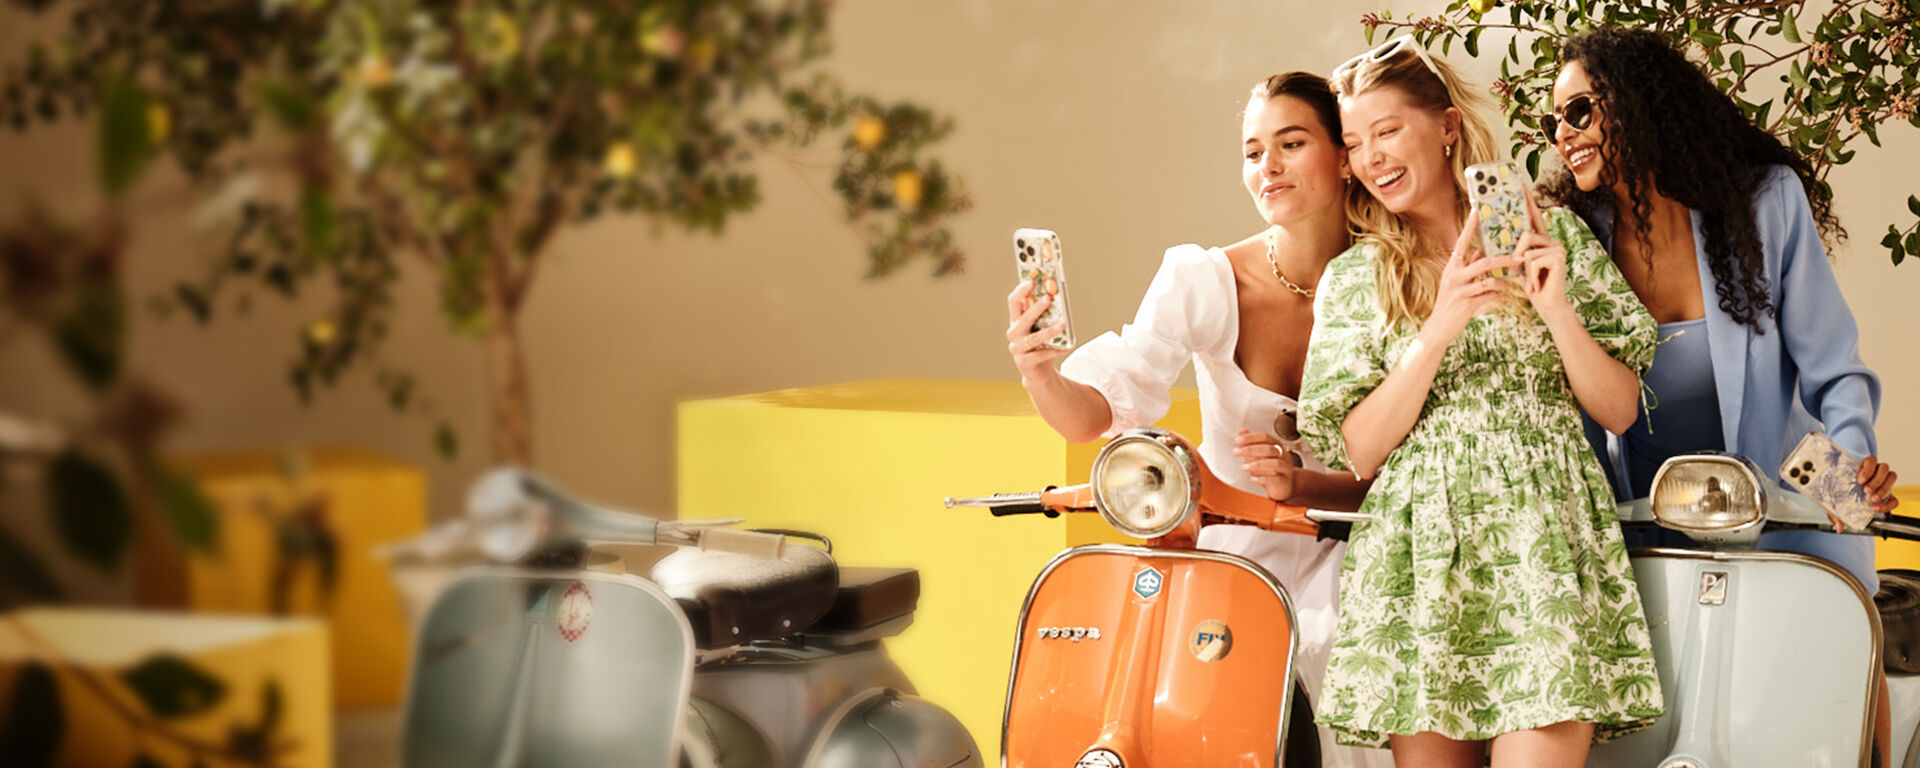  Girls holding cute phone cases on vespas summer vibes| OtterBox